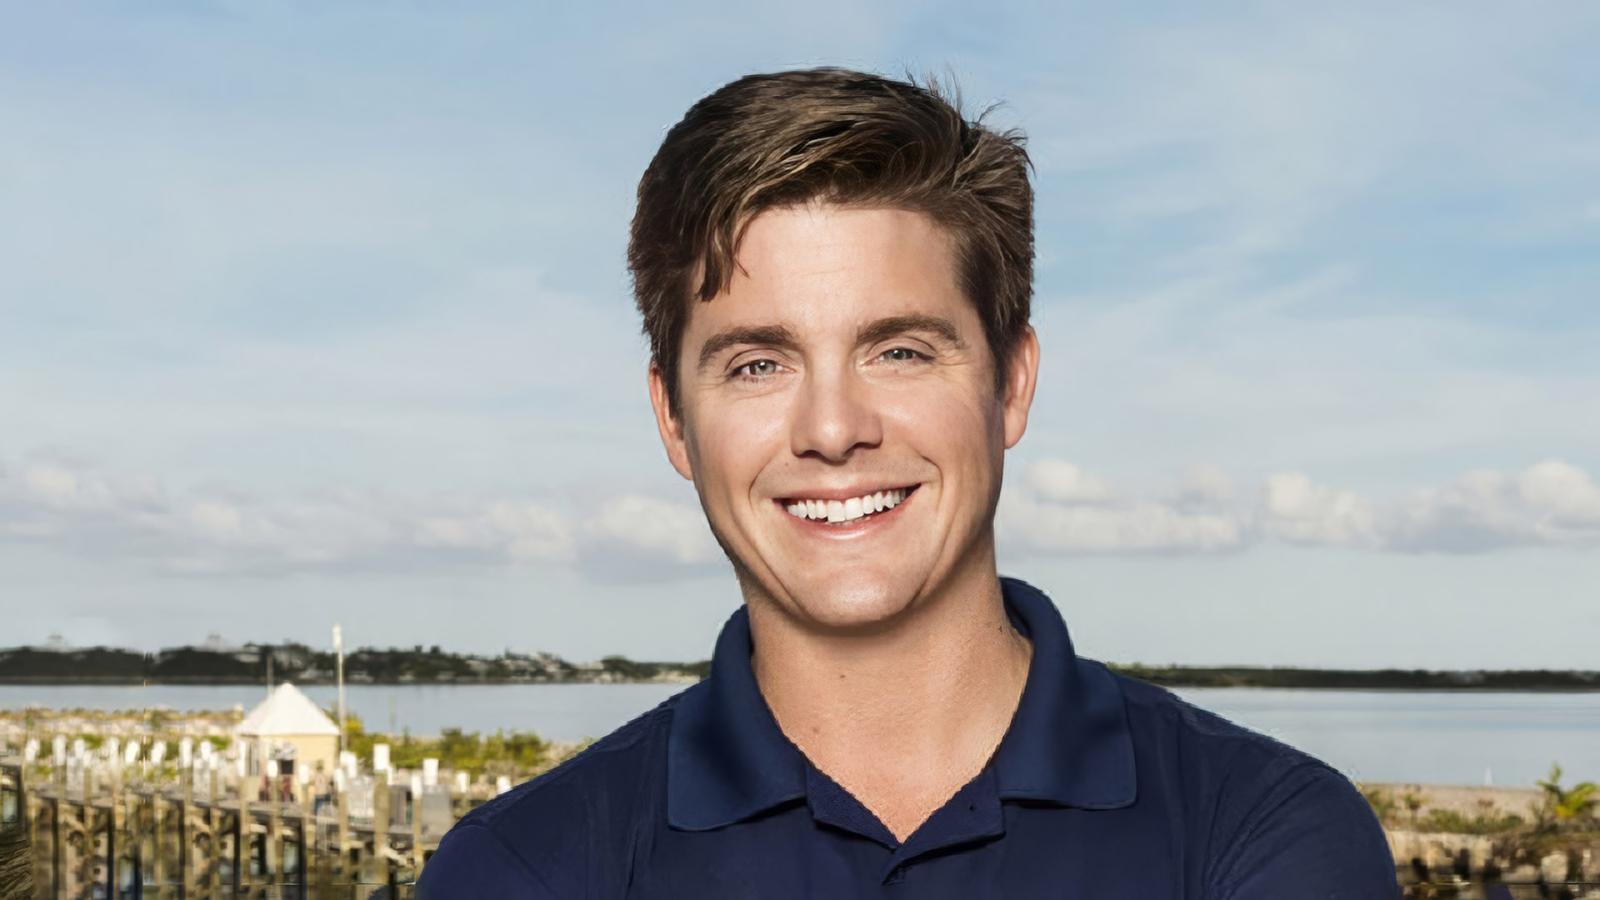 Scripted? No Sir: 4 Below Deck Stars Who Had Near-Death Experience - image 3